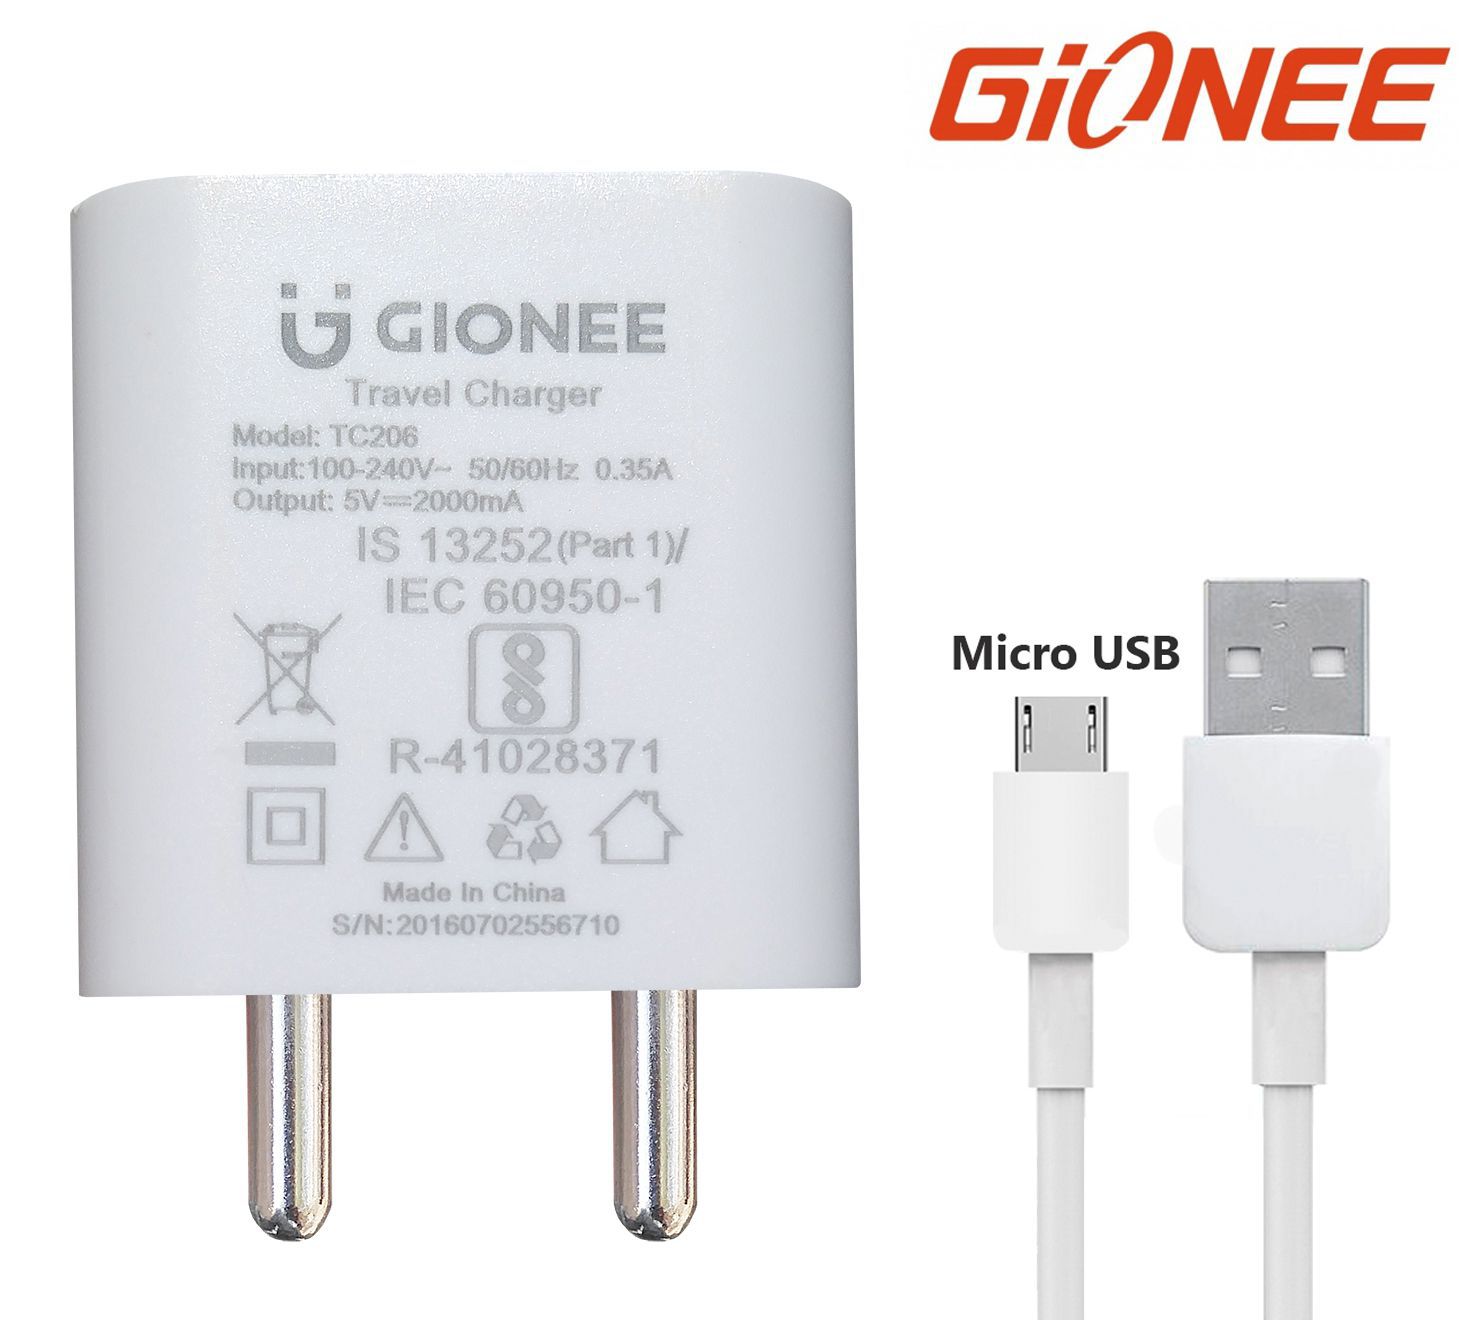     			Gionee 2.1A Travel Charger with Micro USB Cable for Gionee Mobiles